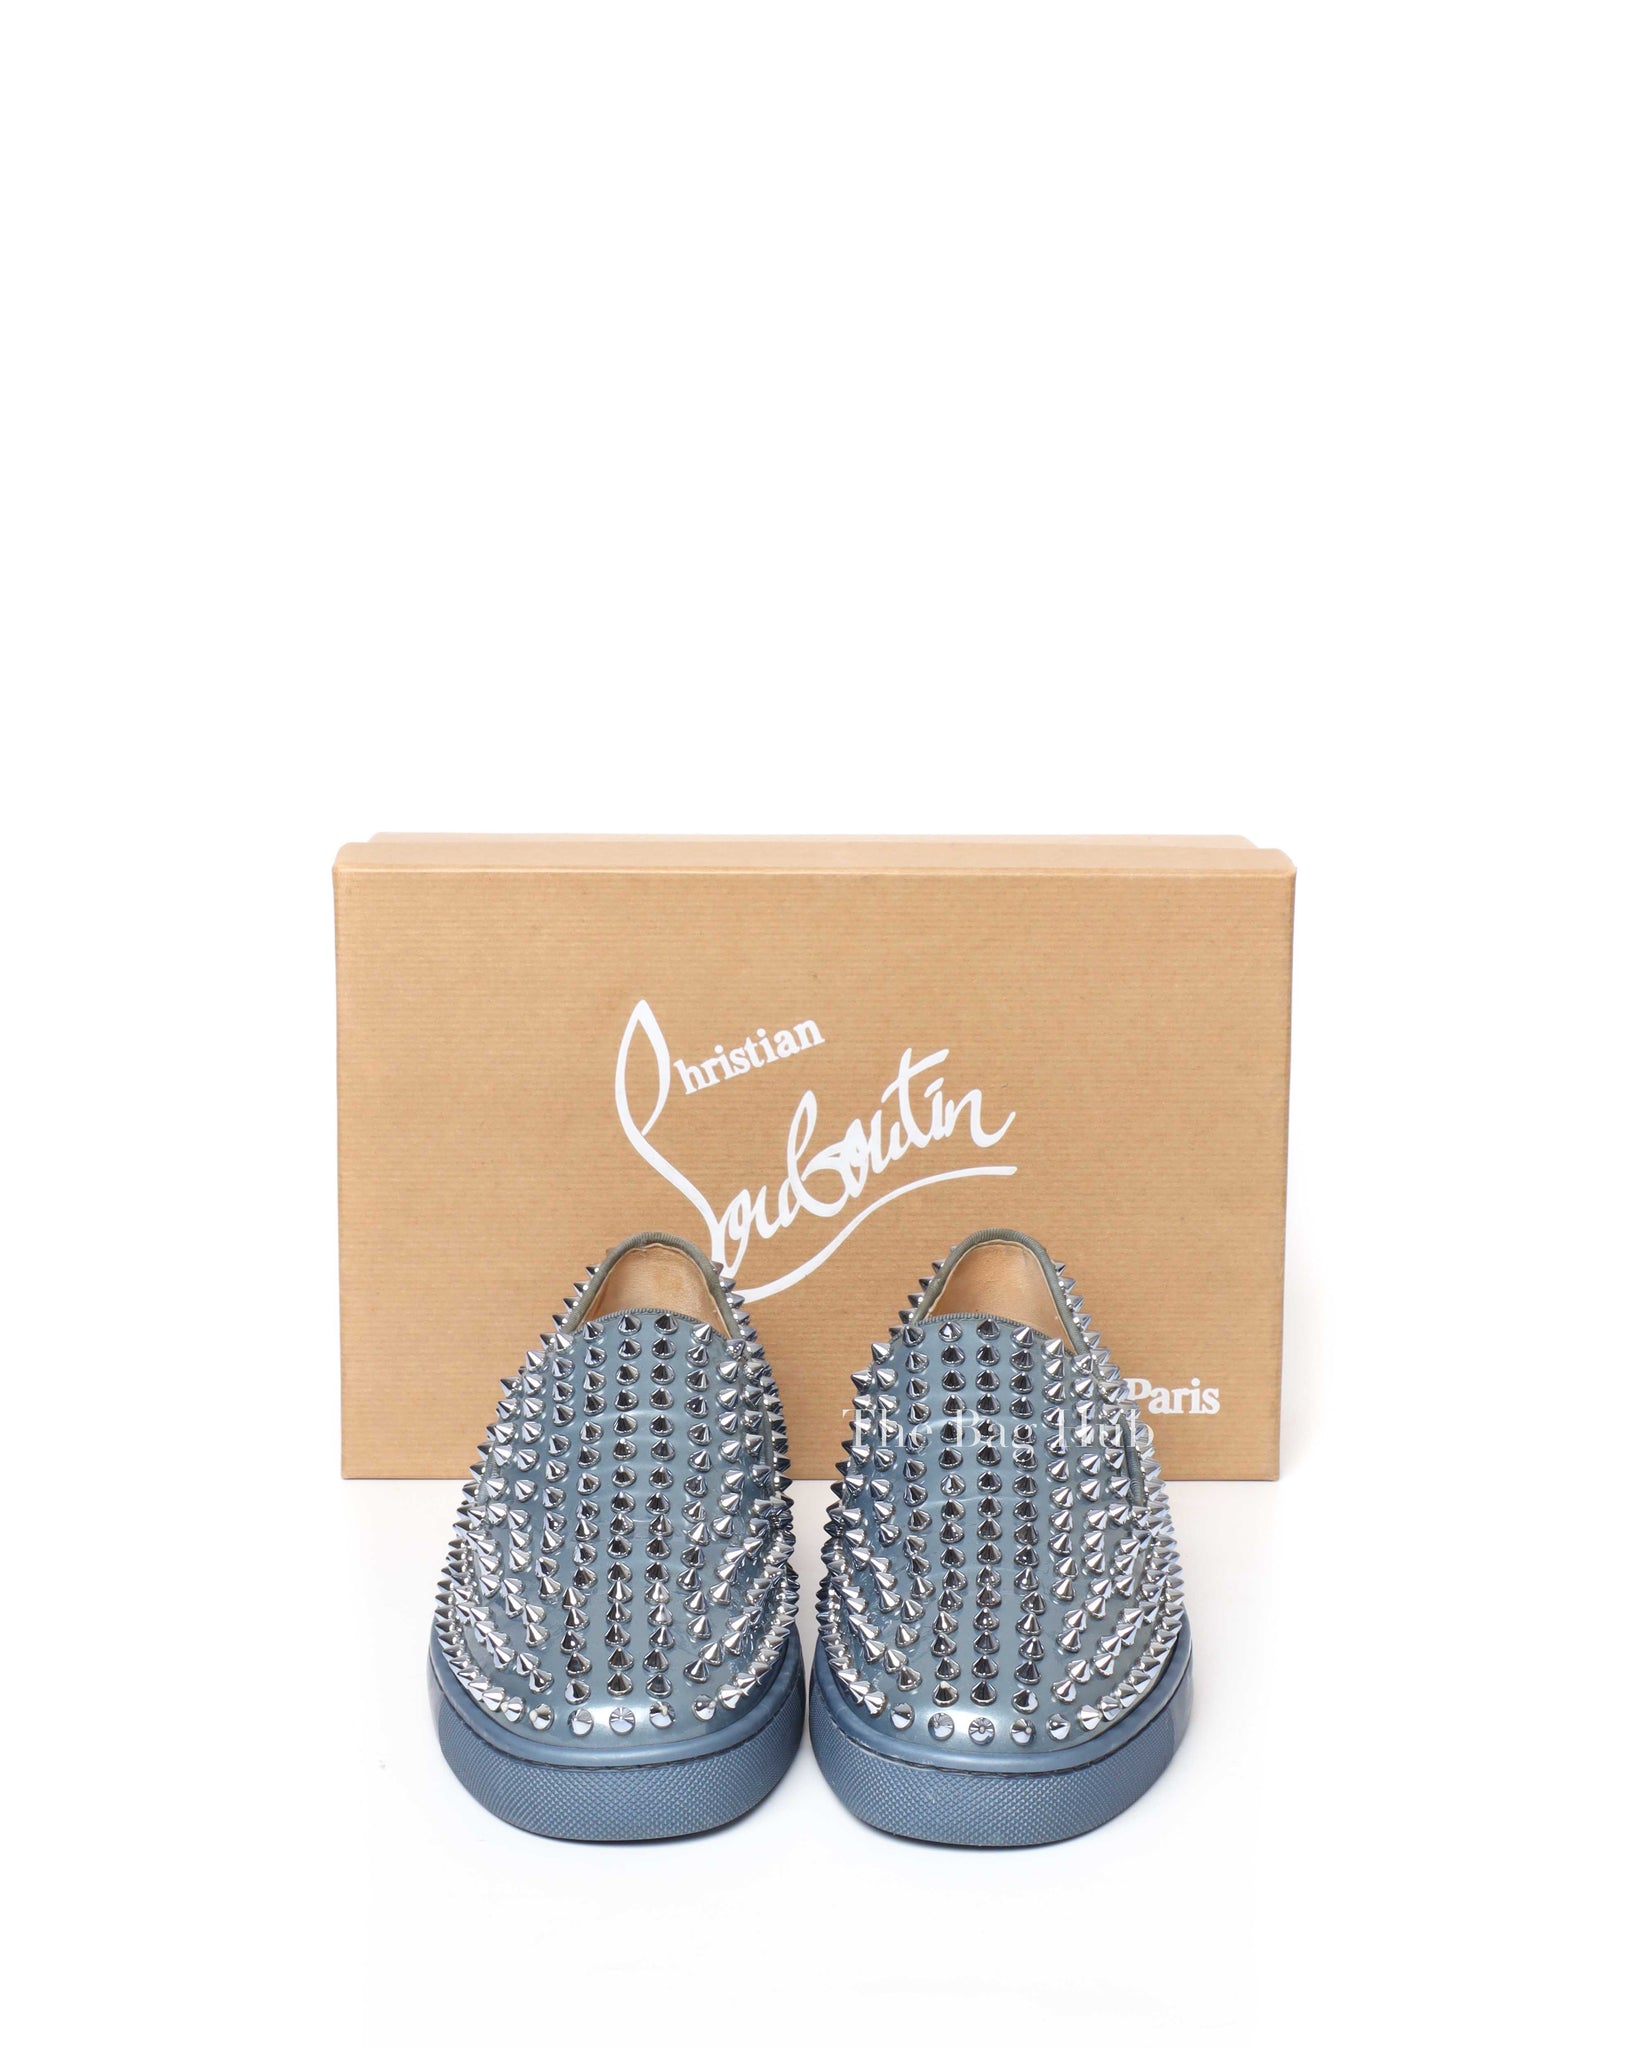 Christian Louboutin Bluish Silver Patent Roller Boat Spike Slip-On Sneakers Size 40-9